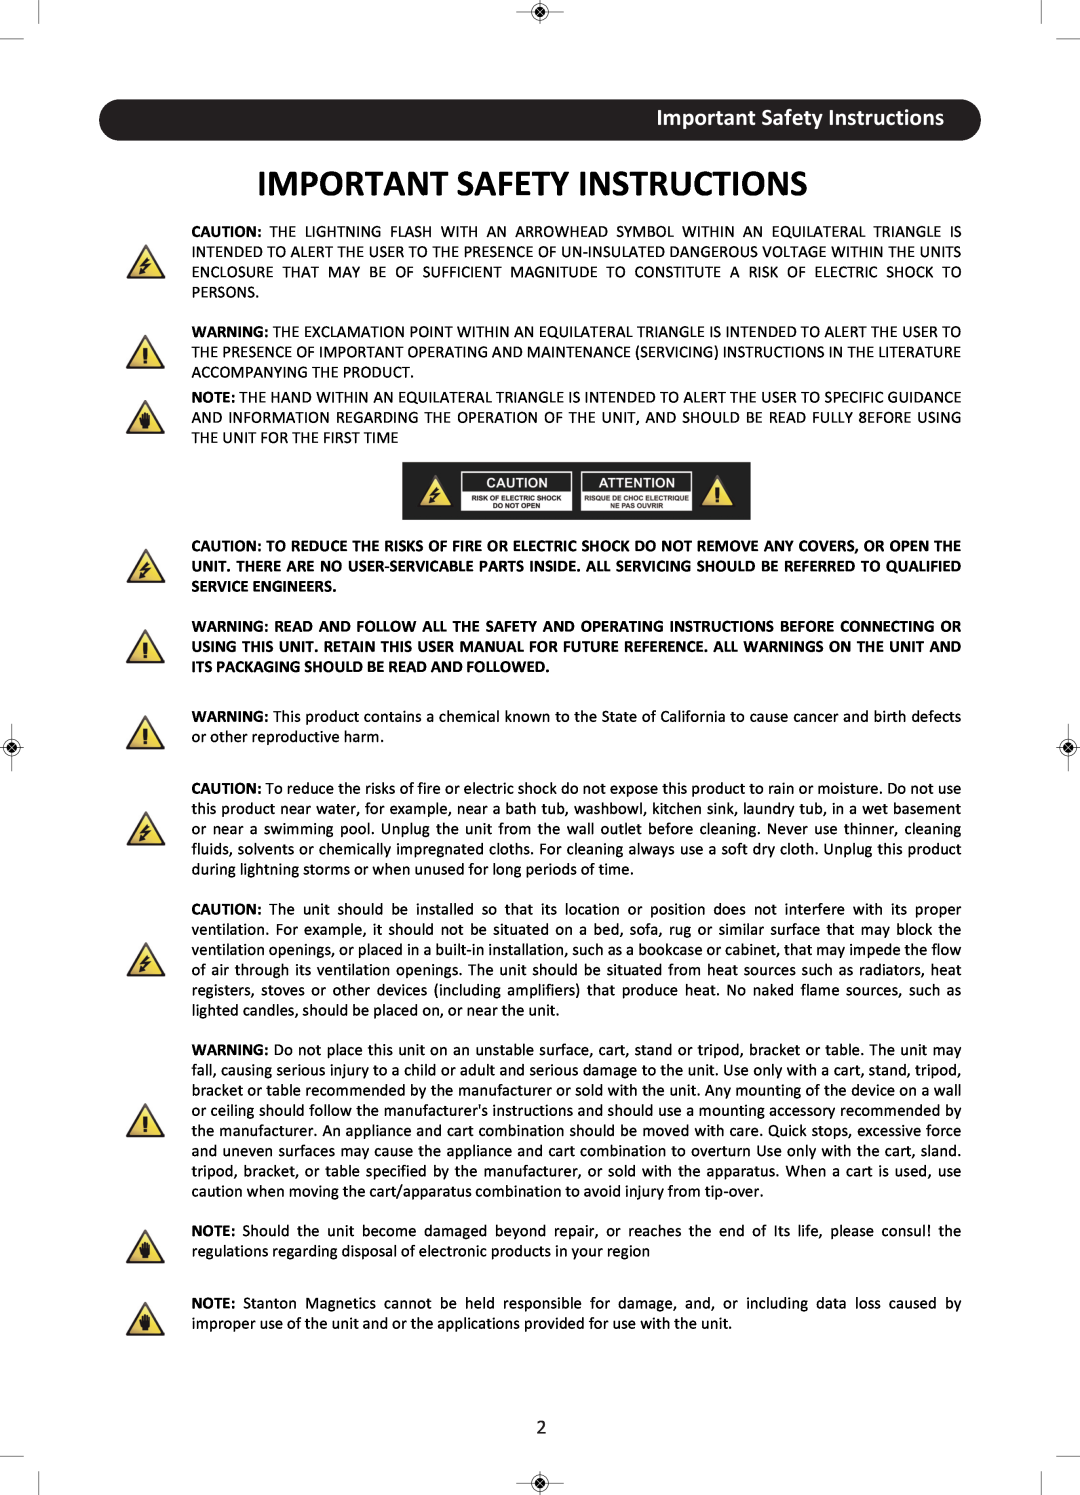 Stanton CMP.800 user manual Important Safety Instructions 